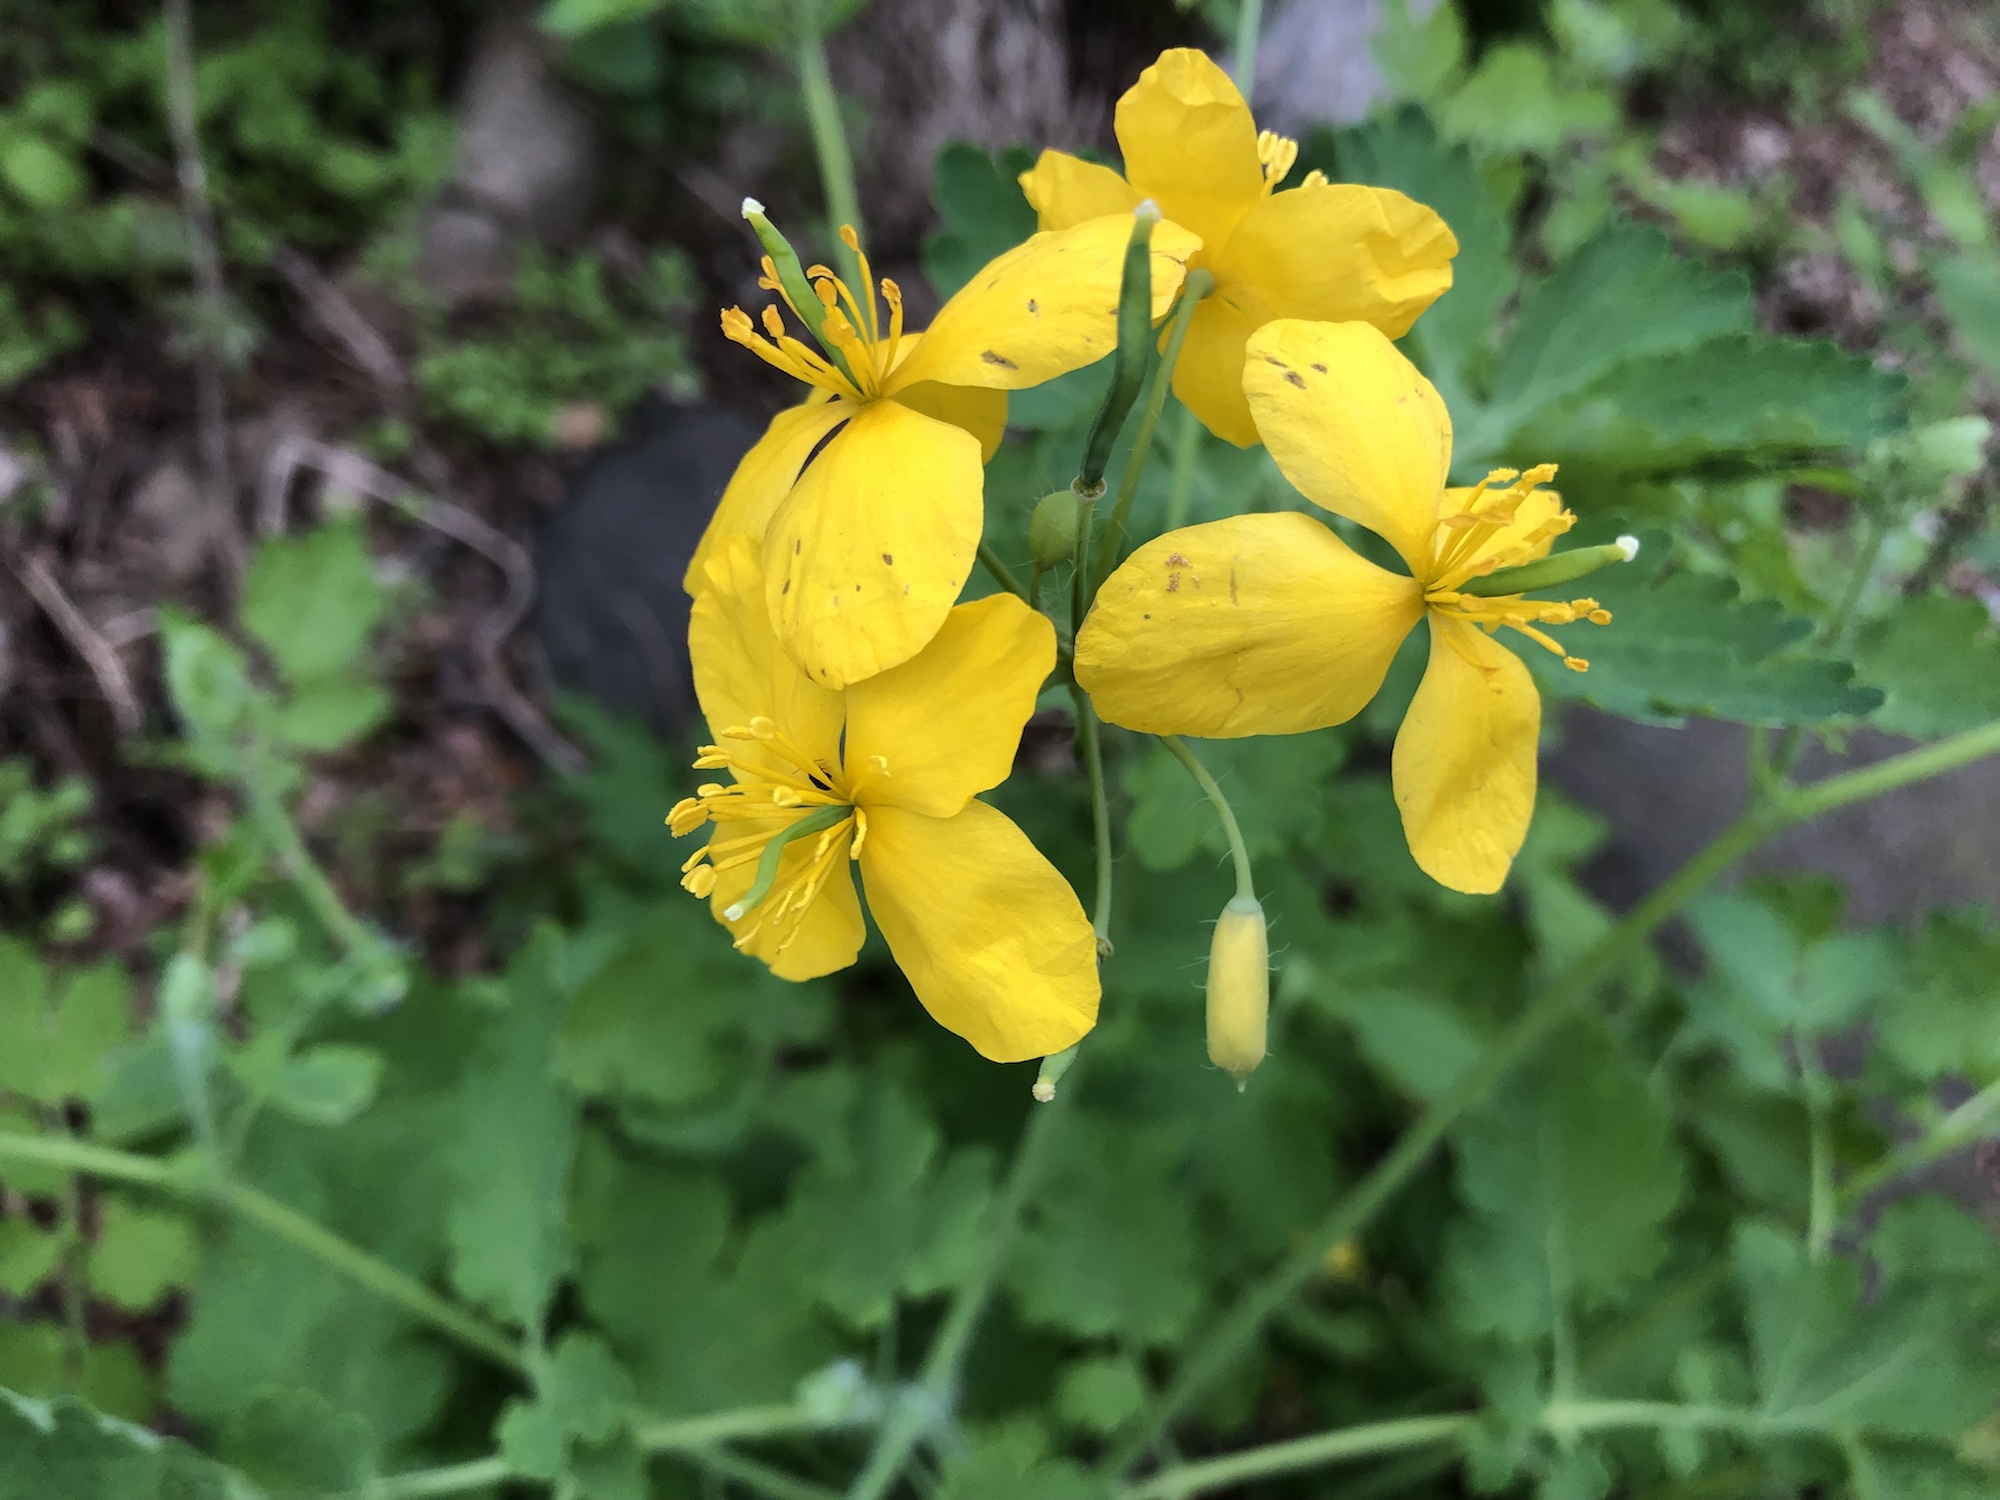 Greater Celandine on May 17, 2019.